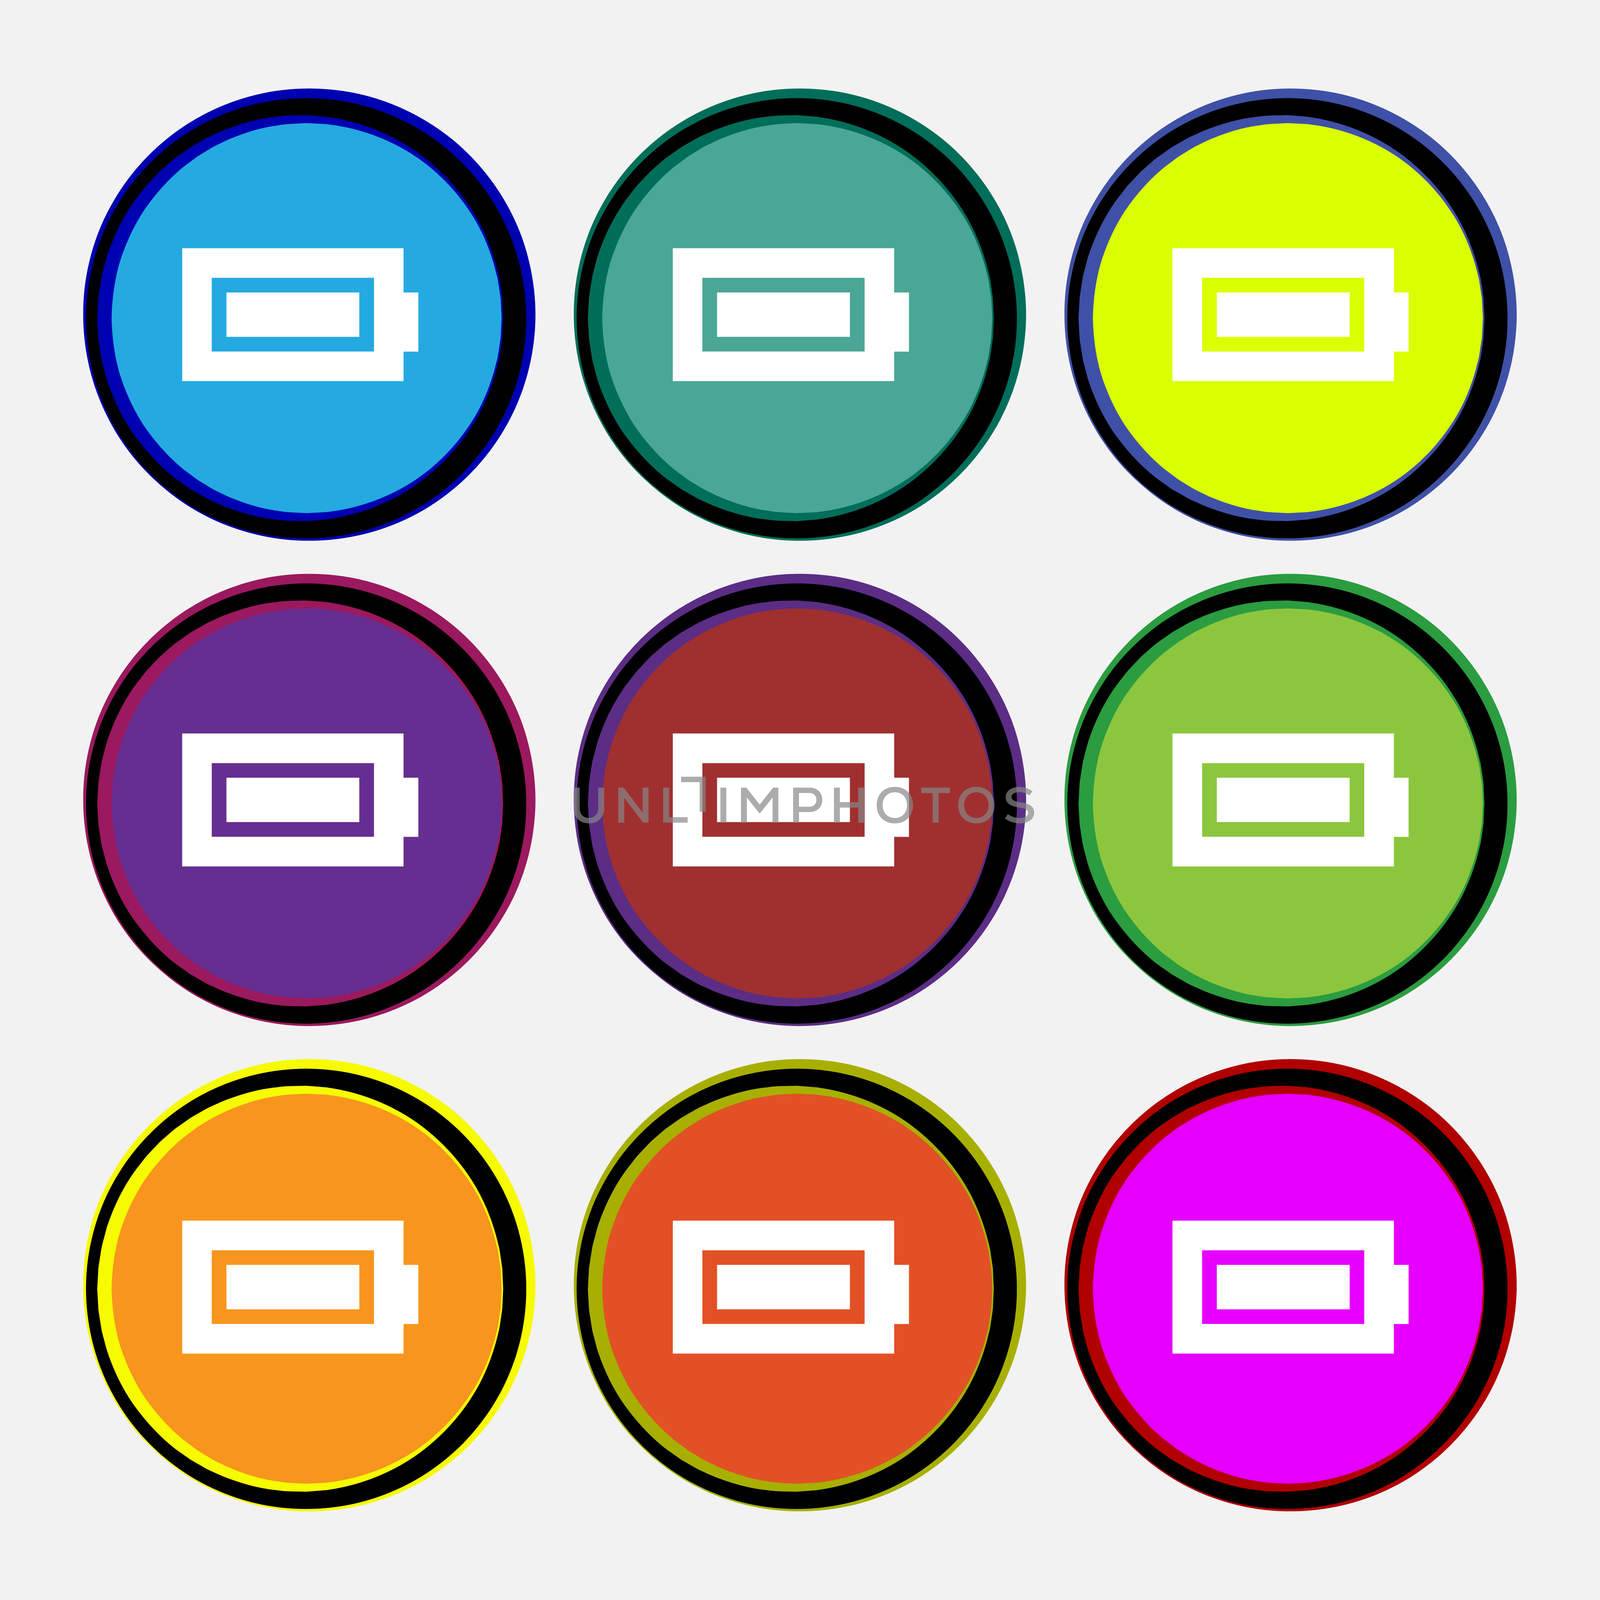 Battery fully charged icon sign. Nine multi-colored round buttons. illustration